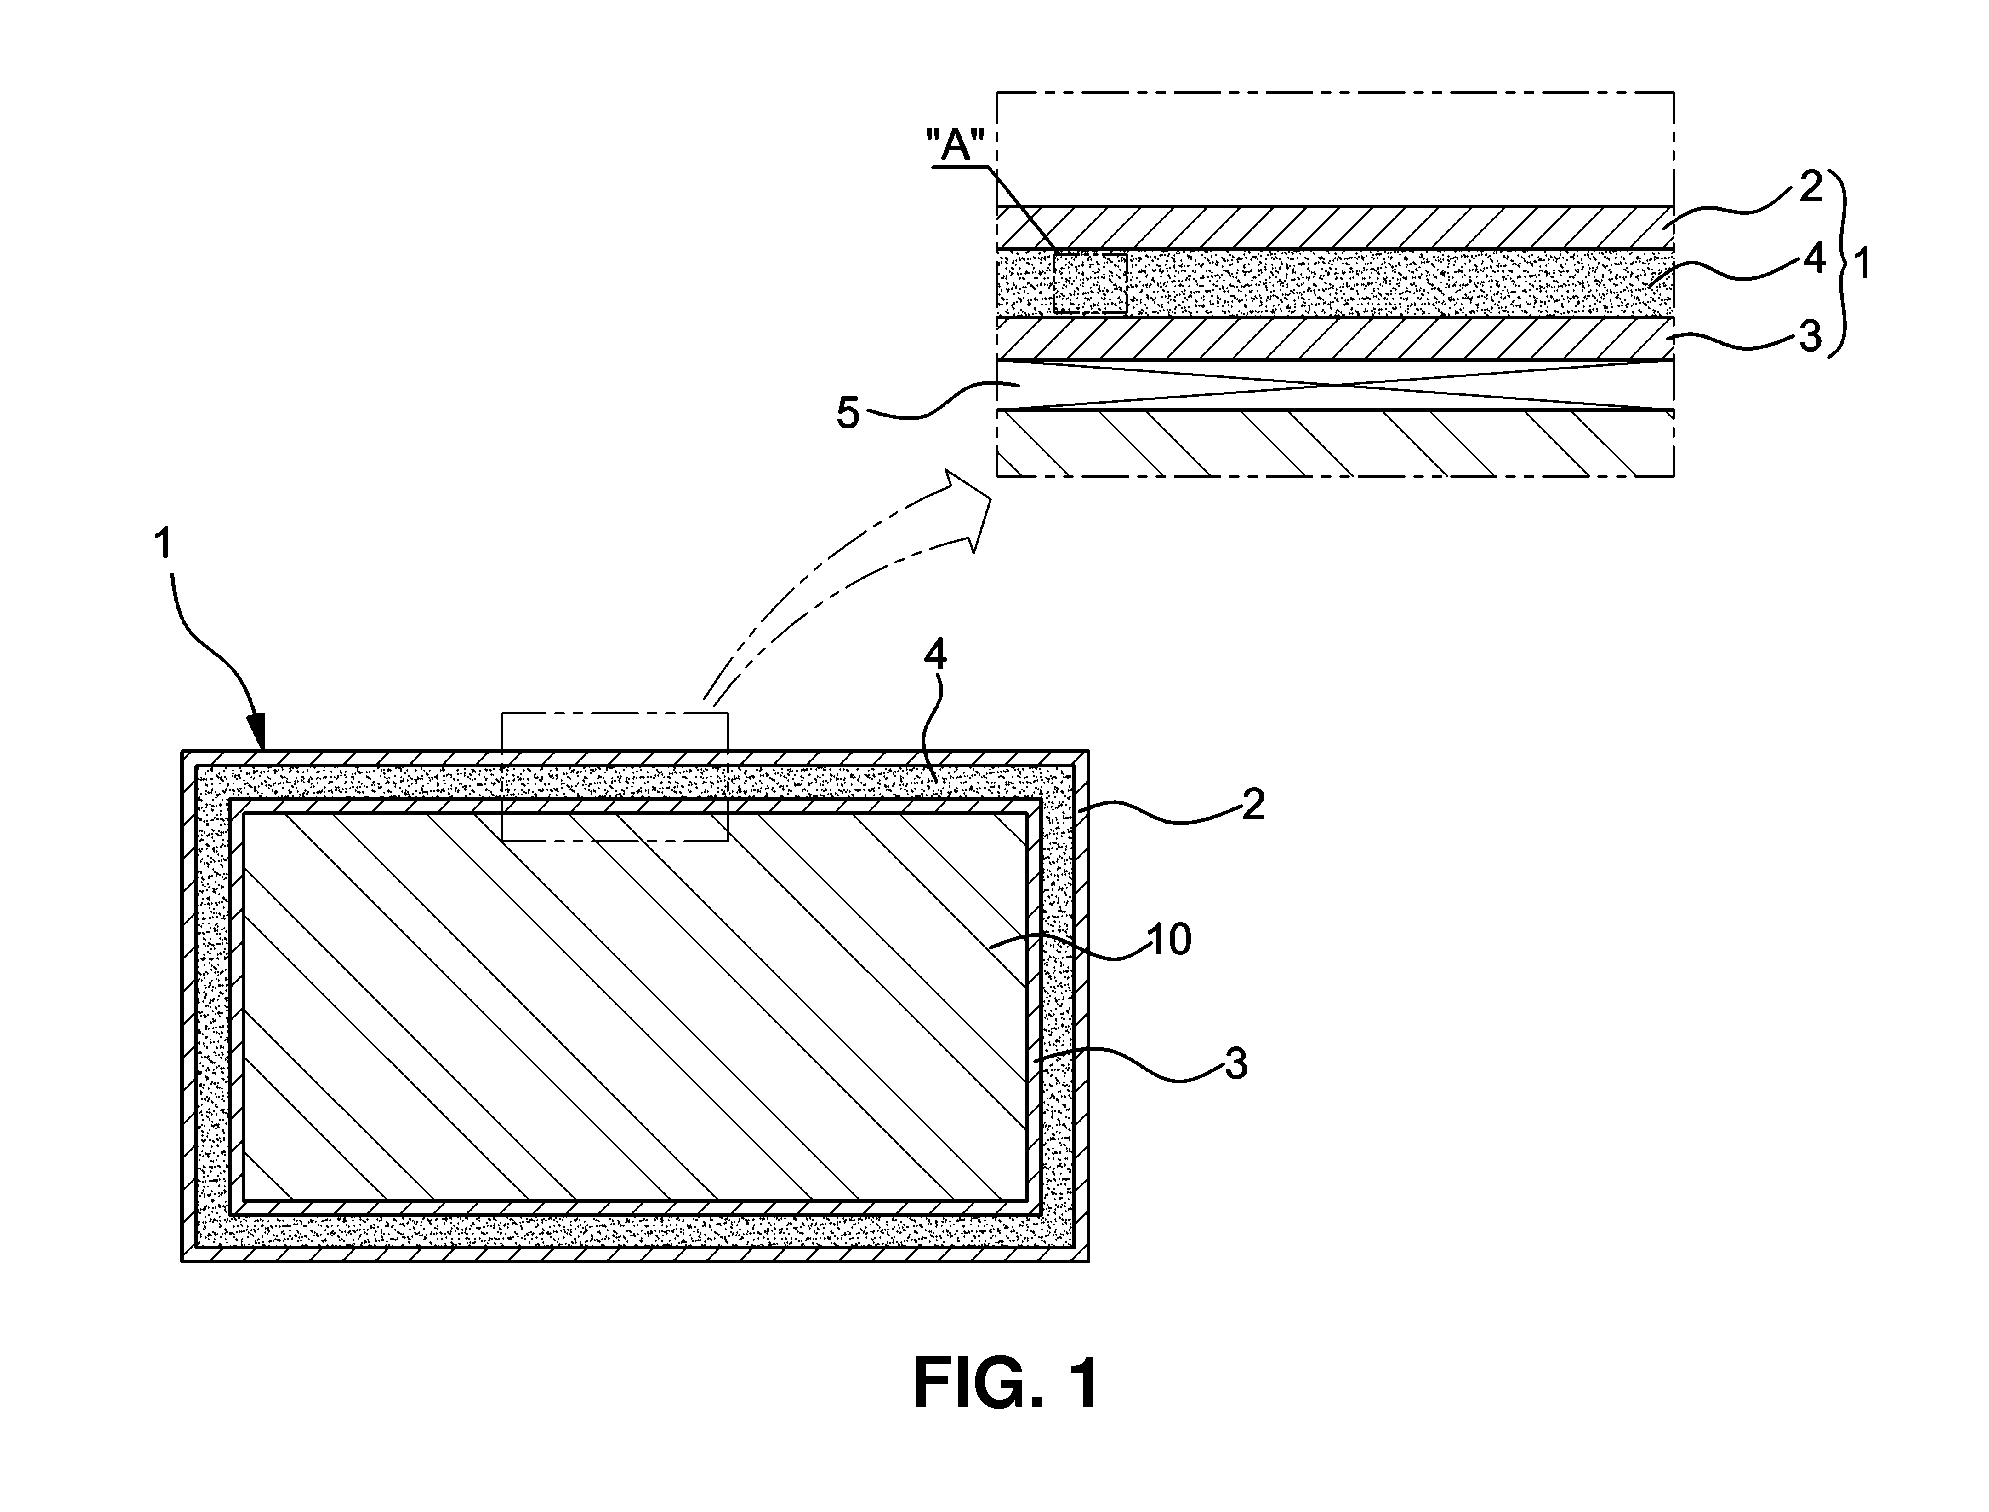 Structure for power electronic parts housing of vehicle